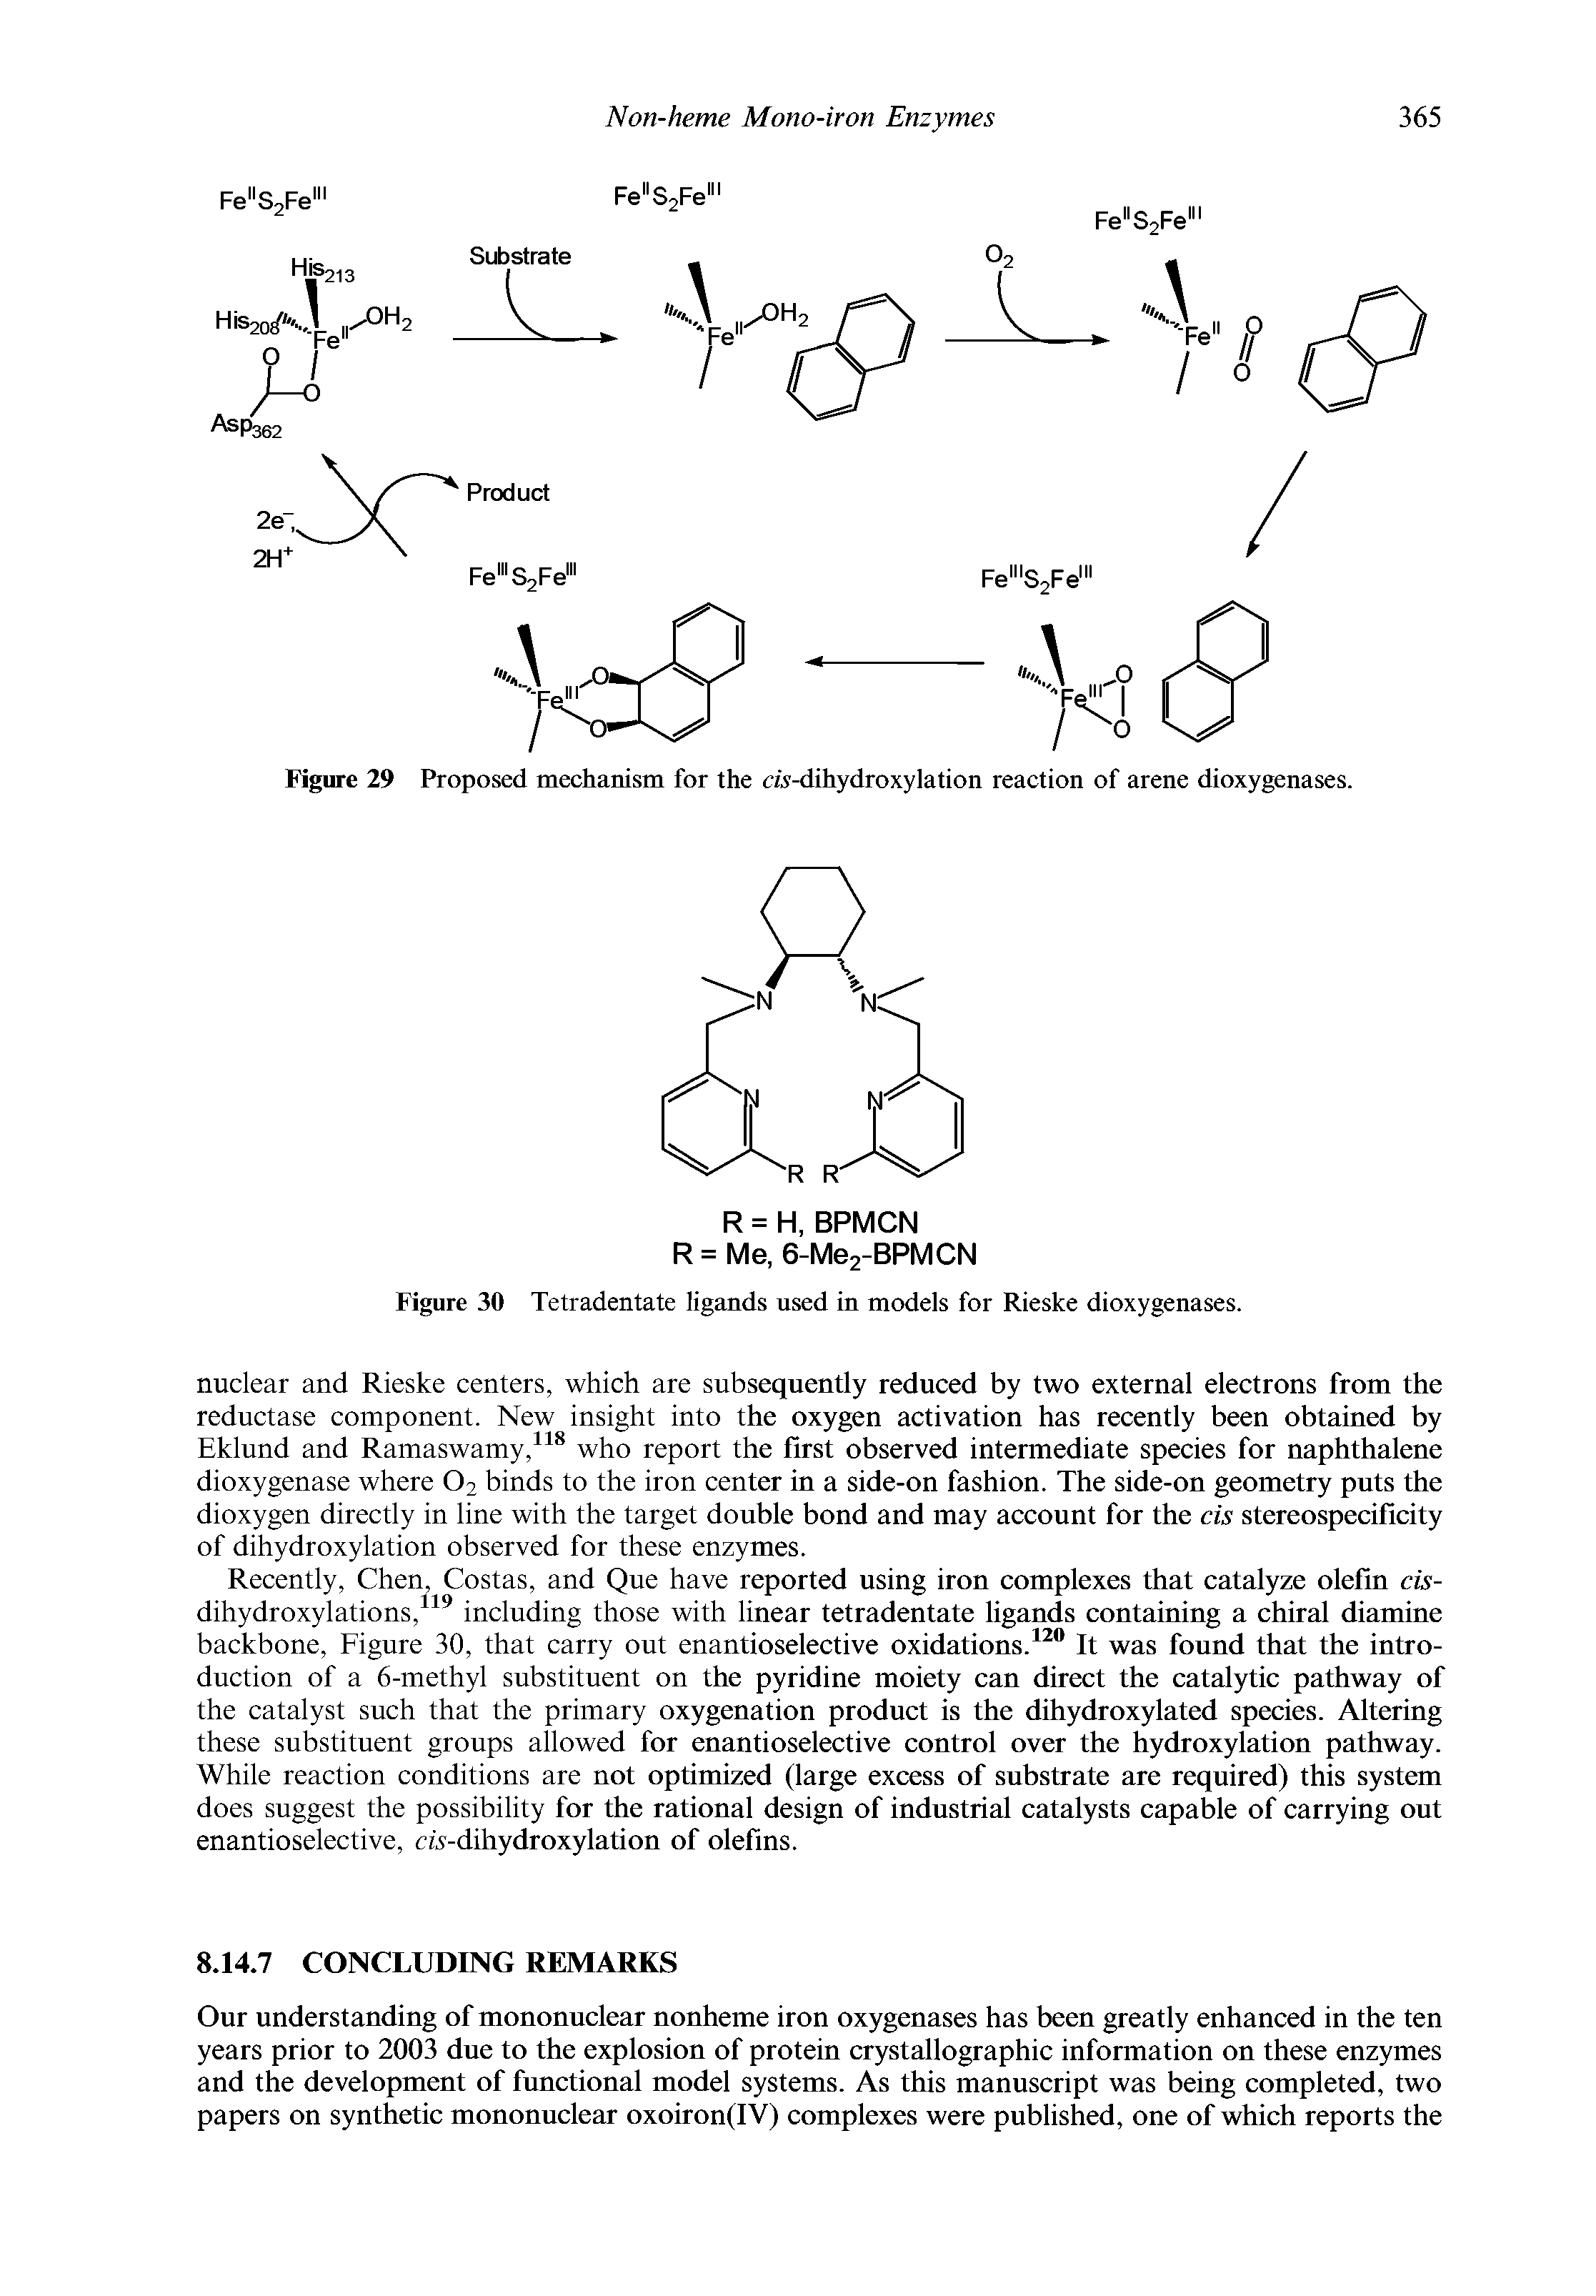 Figure 29 Proposed mechanism for the cis-dihydroxylation reaction of arene dioxygenases.